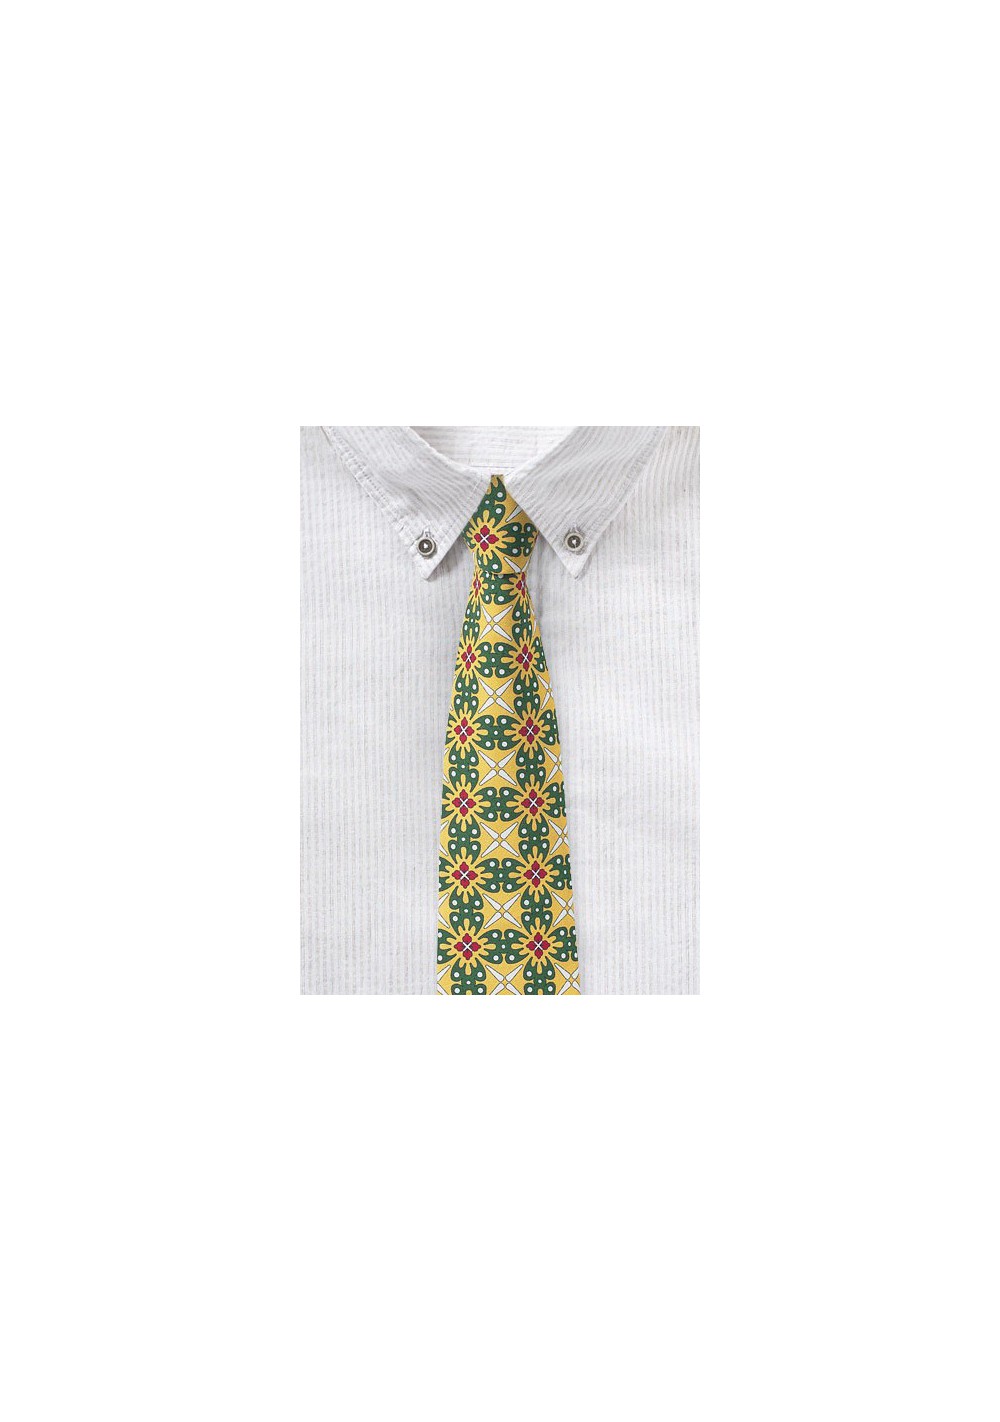 Vintage Yellow and Green Geometric Cotton Tie